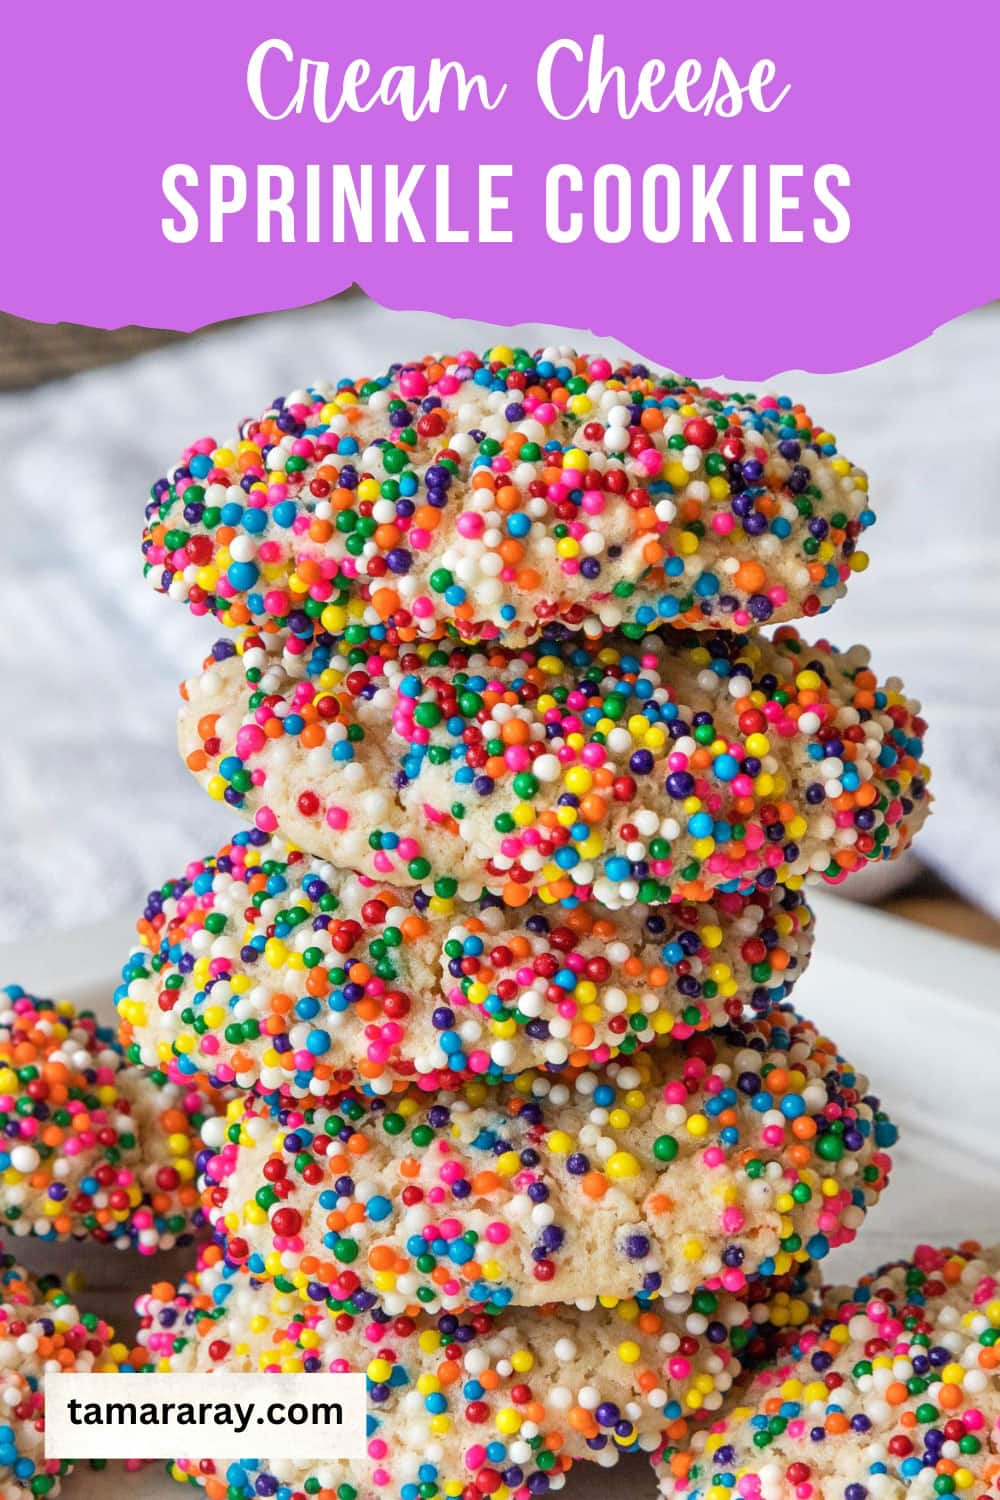 Cream cheese cookies with sprinkles on a plate.